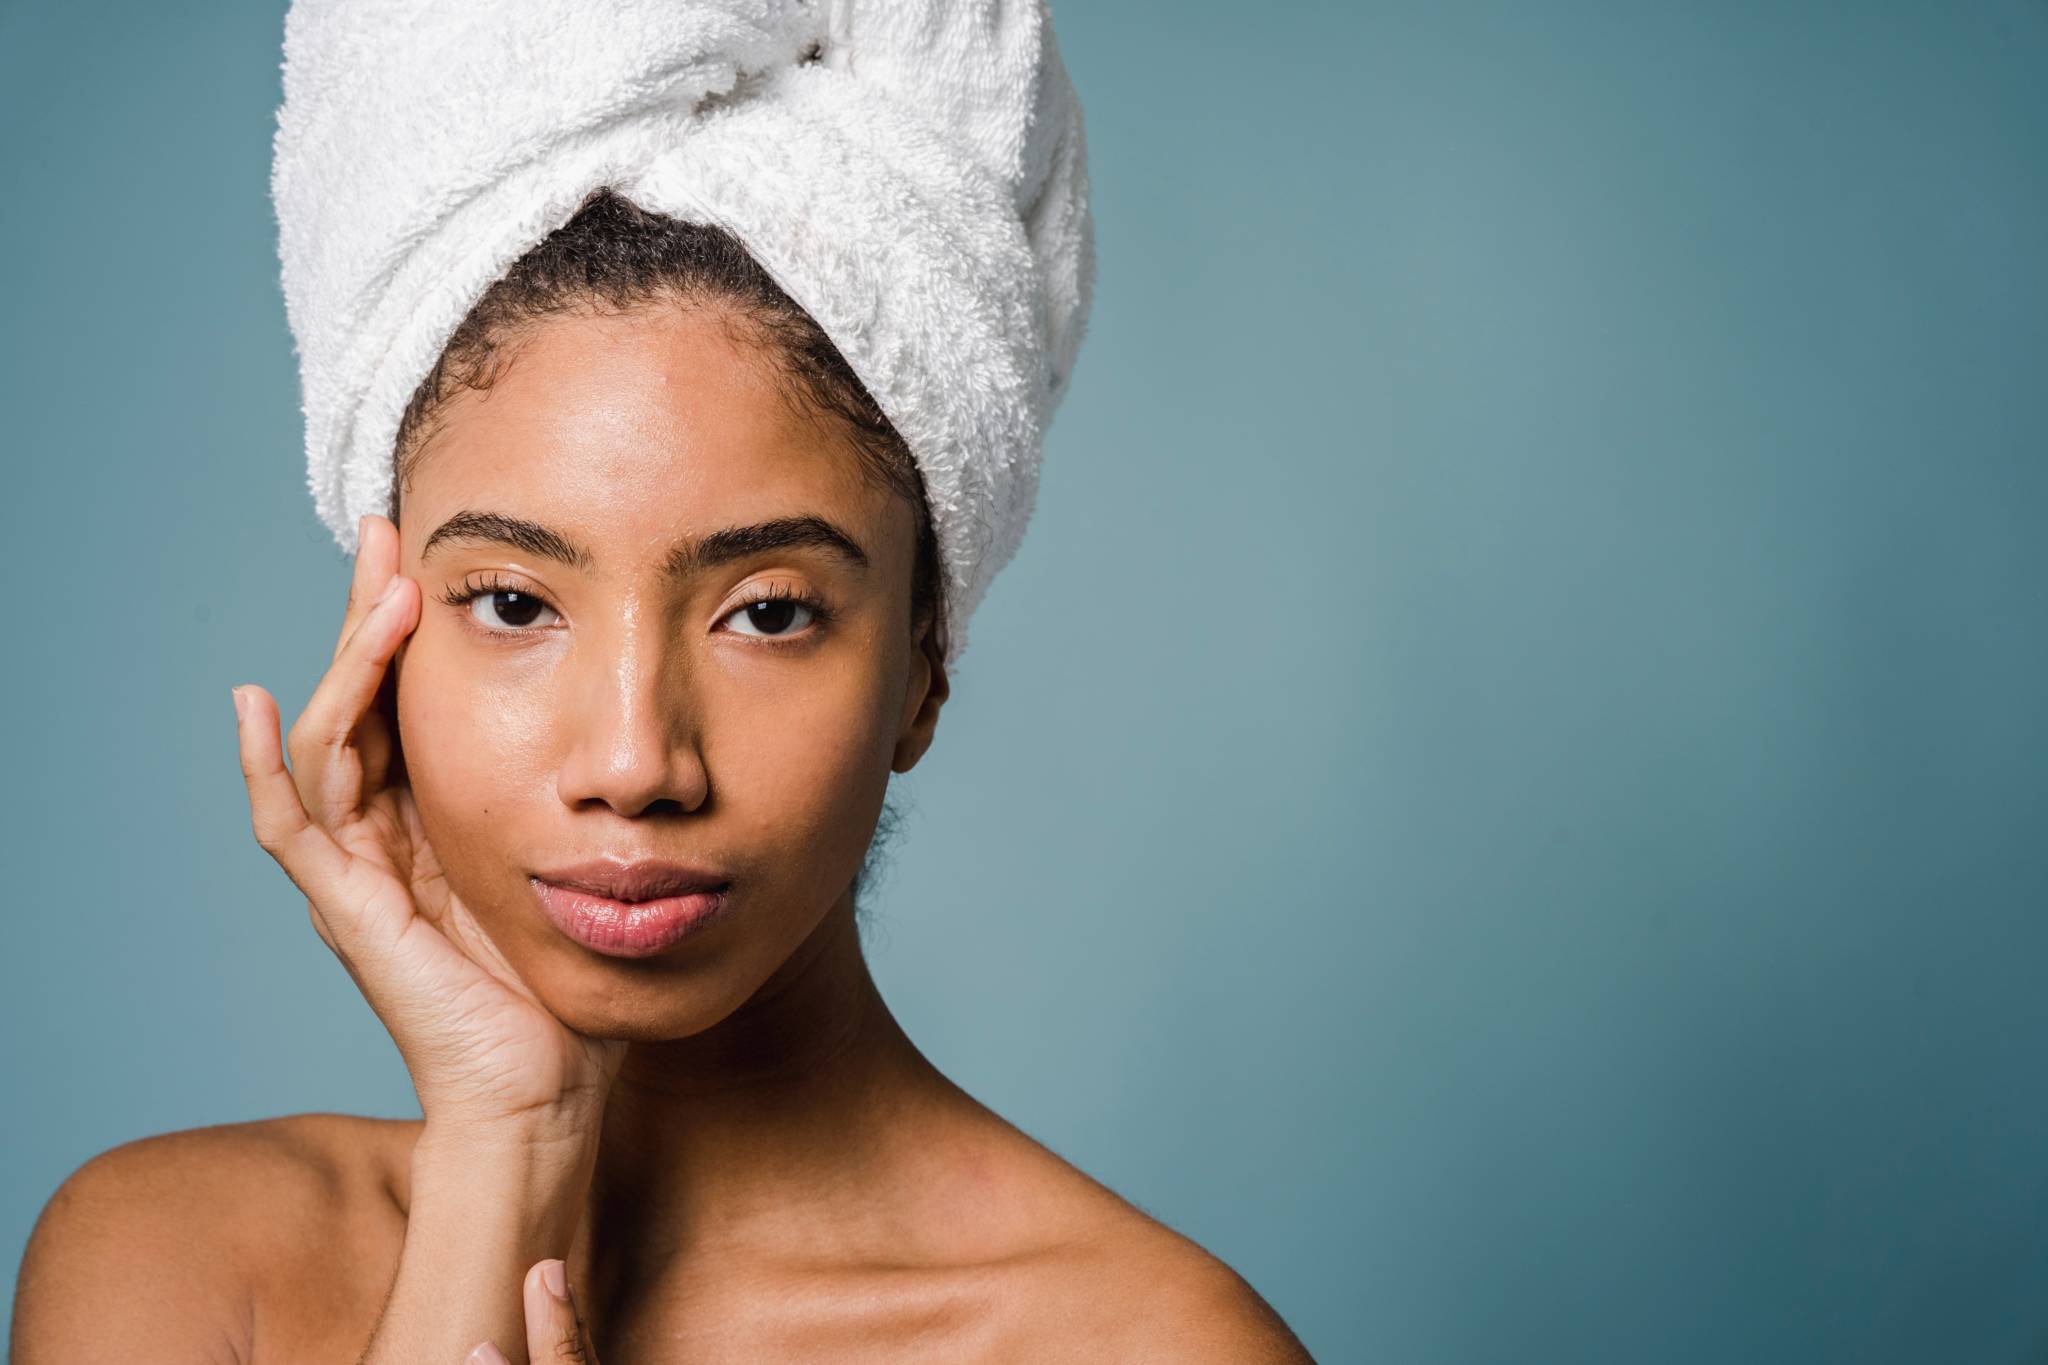 woman of color wearing towel in hair and touching face